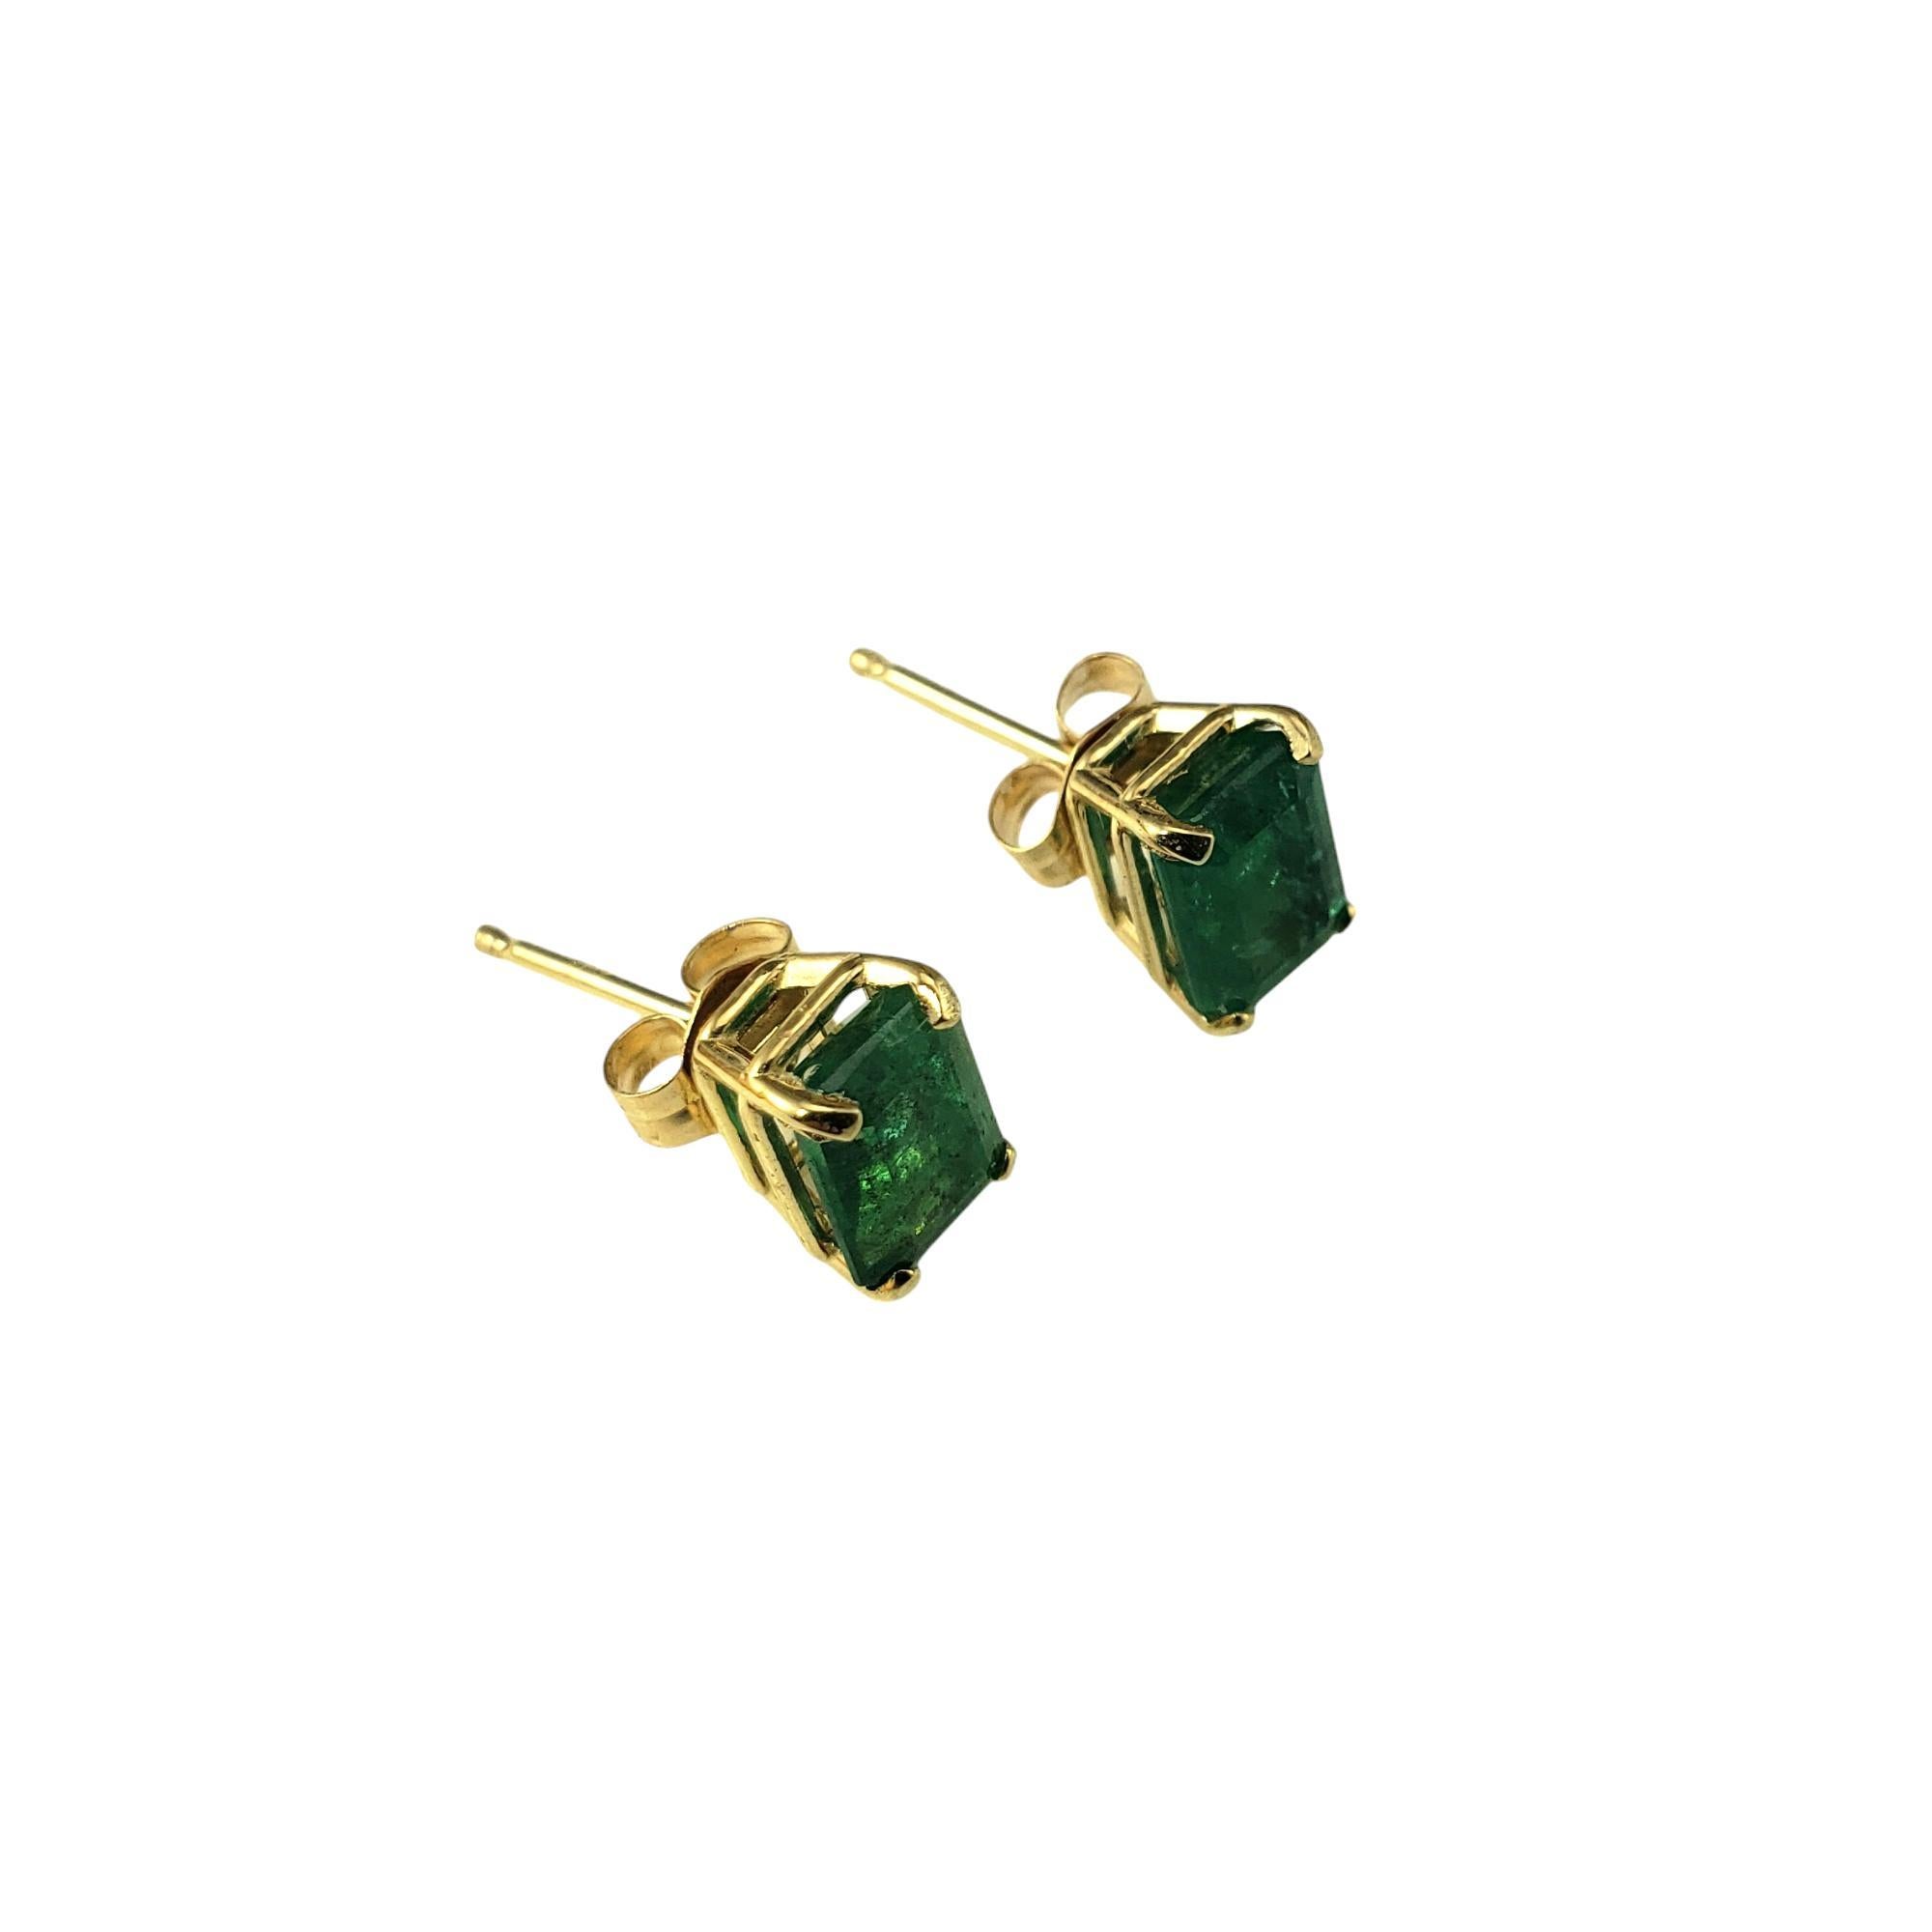 14K Yellow Gold Emerald Cut Emerald Stud Earrings #17176 In Good Condition For Sale In Washington Depot, CT